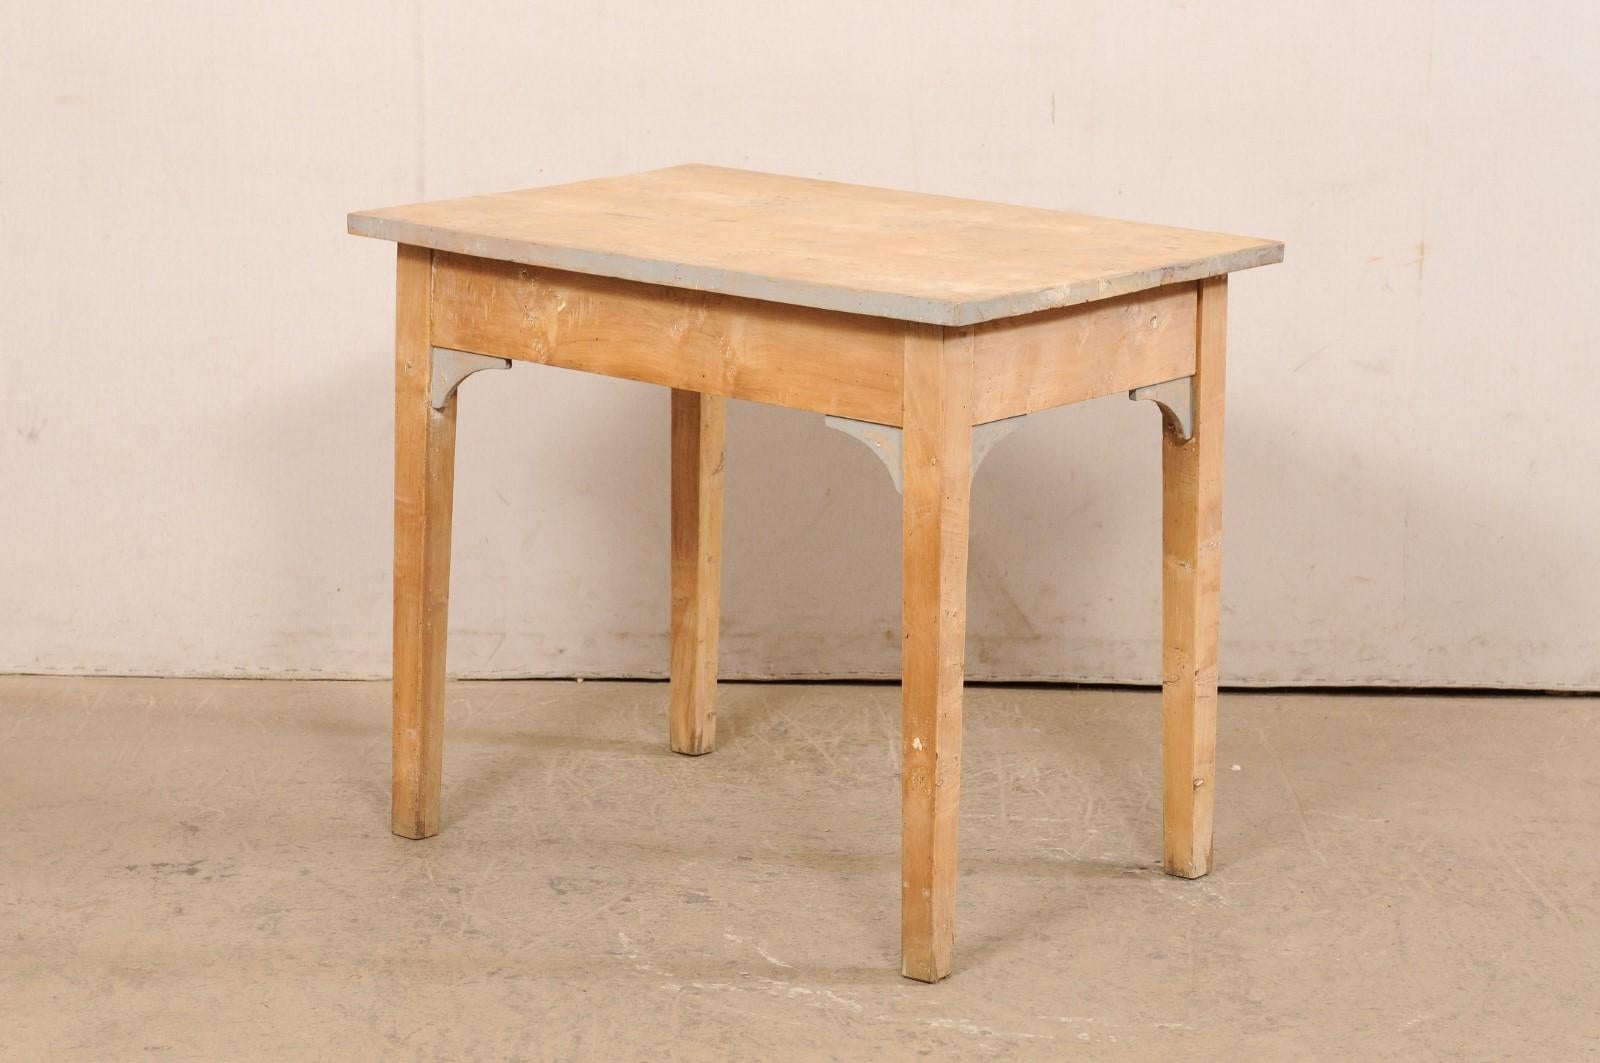 Swedish Curly Birch Wood Table, Early 20th C. For Sale 6